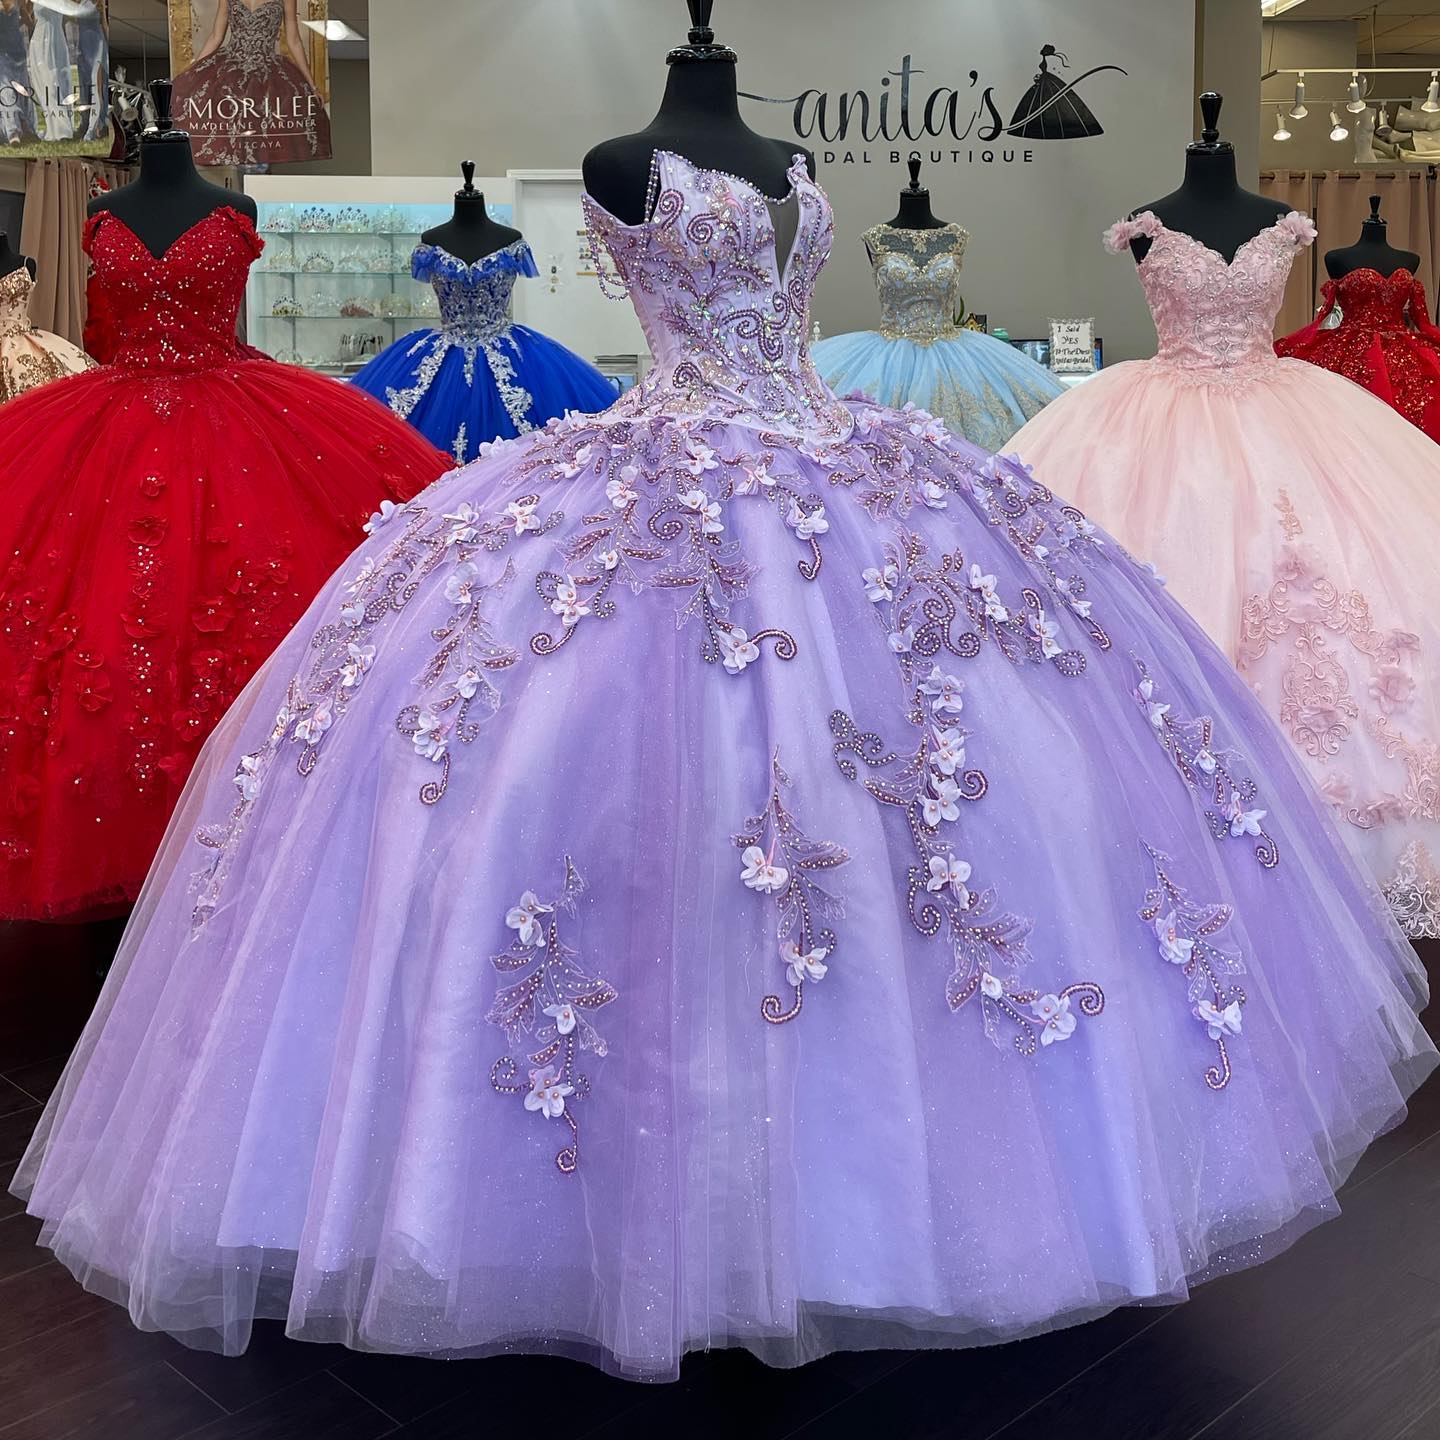 Lavender Beaded Ball Gown Quinceanera Dresses Flowers Appliqued Spaghetti Straps Neckline Prom Gowns Tulle Floor Length Sweet 15 Masquerade Dress